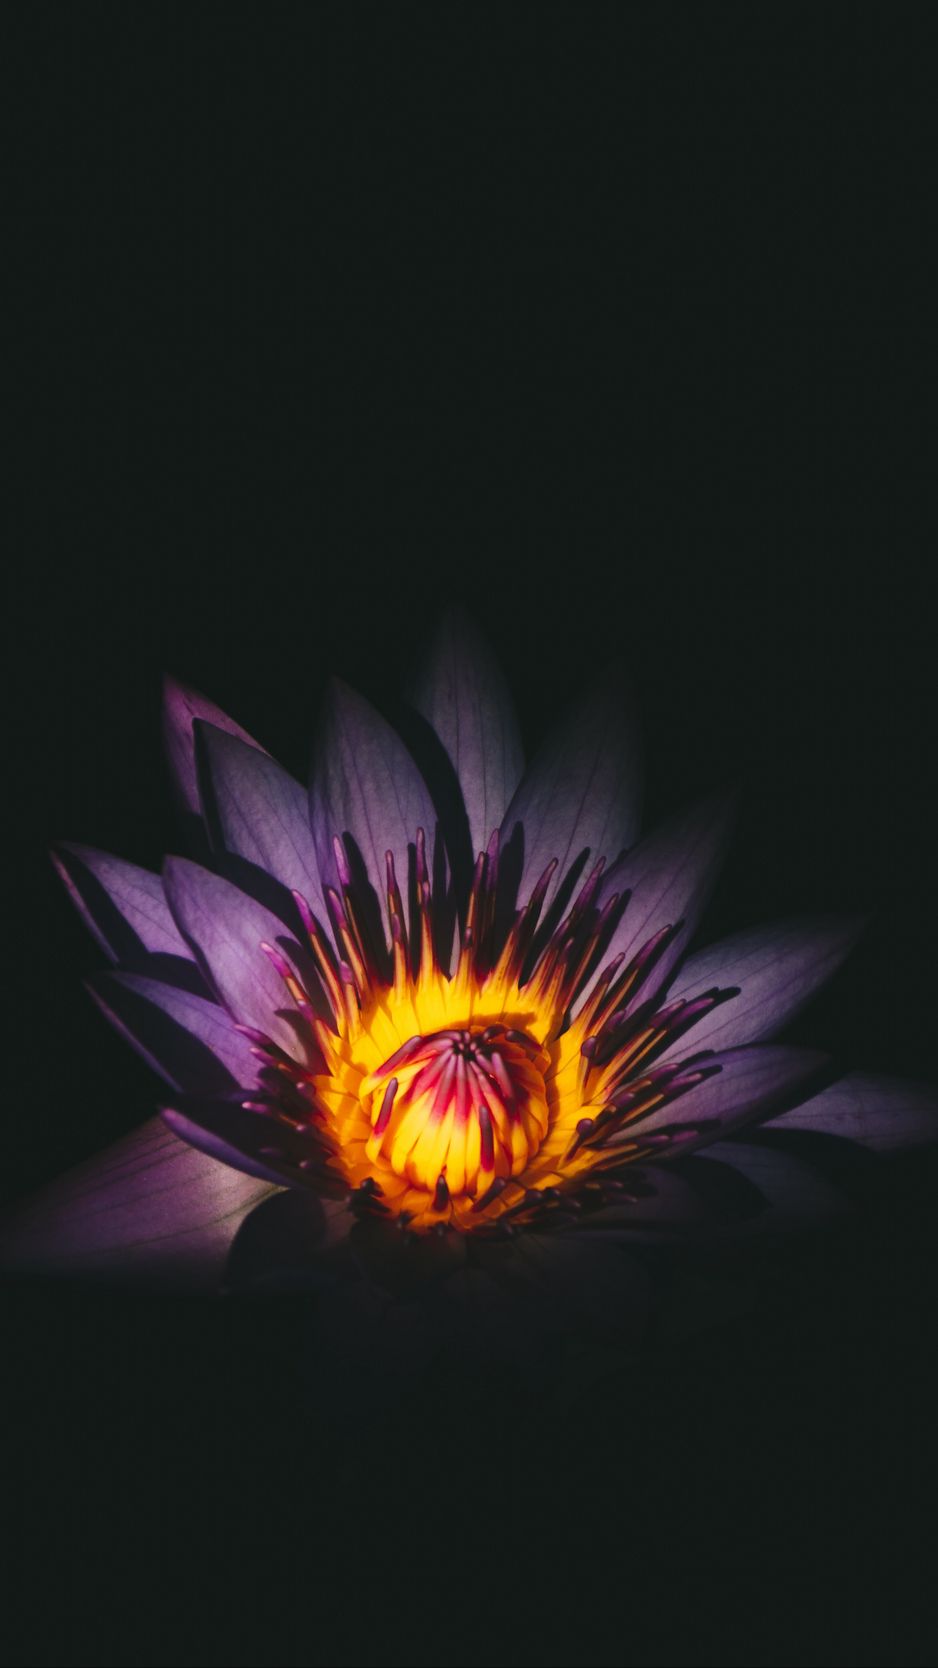 Download wallpaper 938x1668 lotus, flower, bud, purple iphone 8/7/6s/6 for  parallax hd background